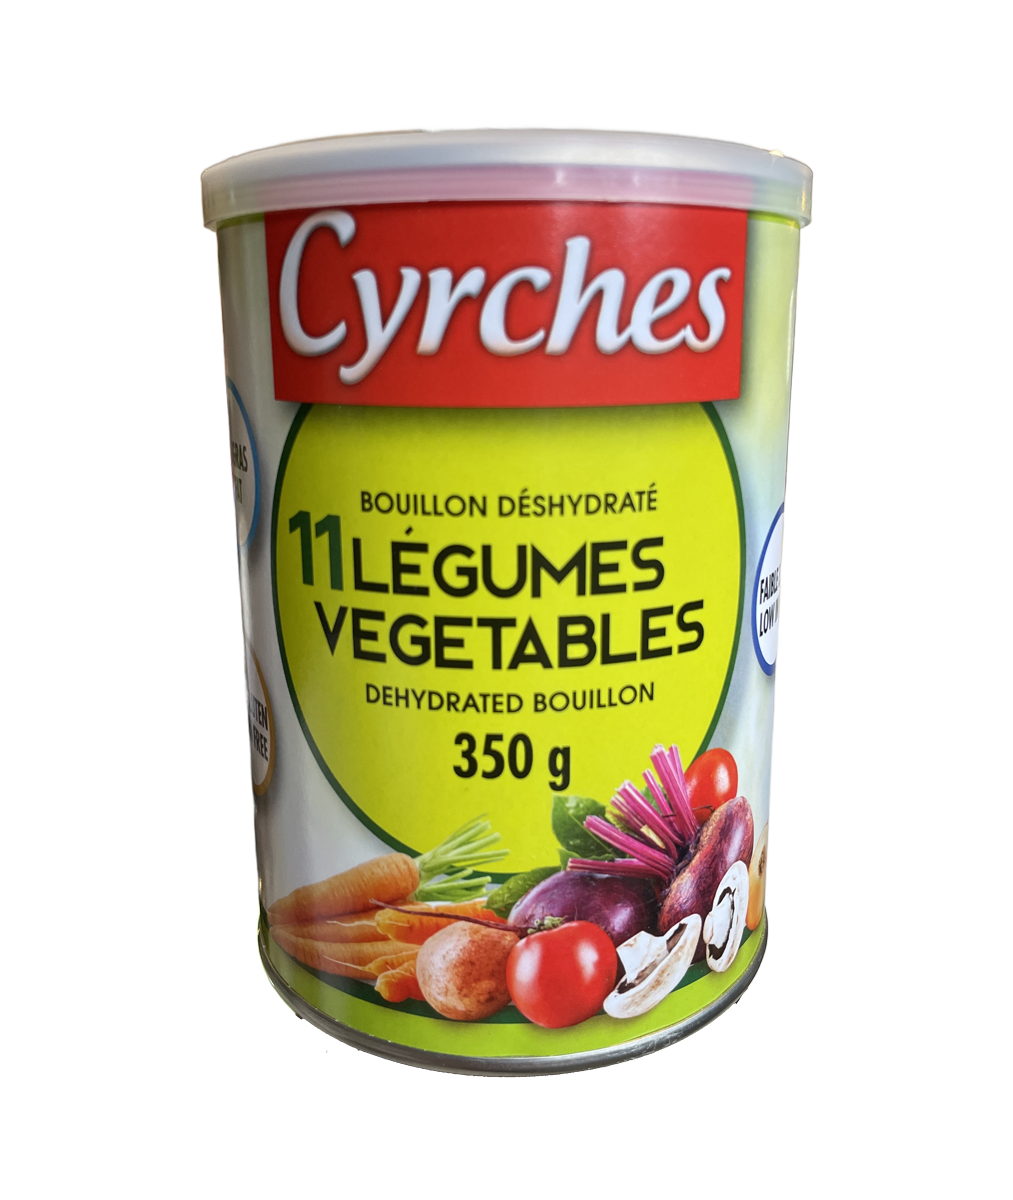 Cyrches 11 Vegetables Dehydrated Bouillon 350g